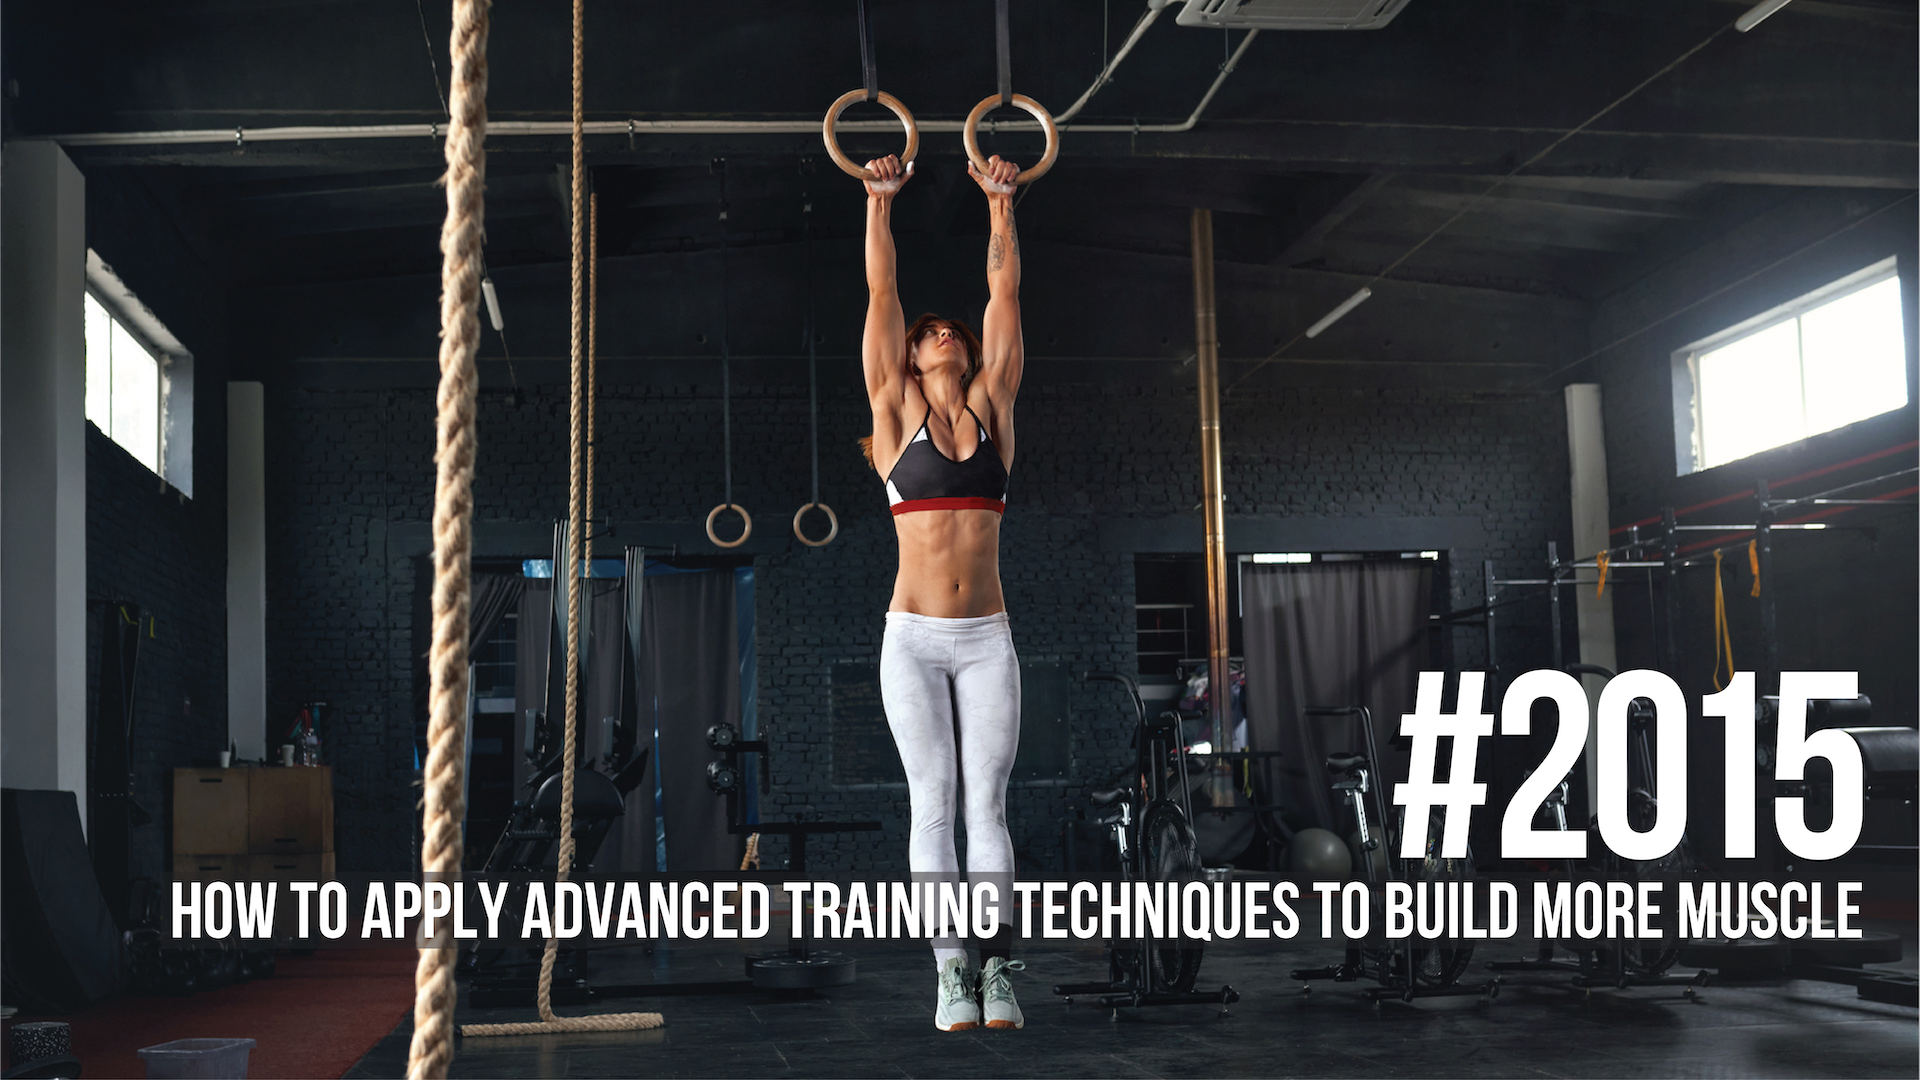 2015: How to Apply Advanced Training Techniques to Build More Muscle